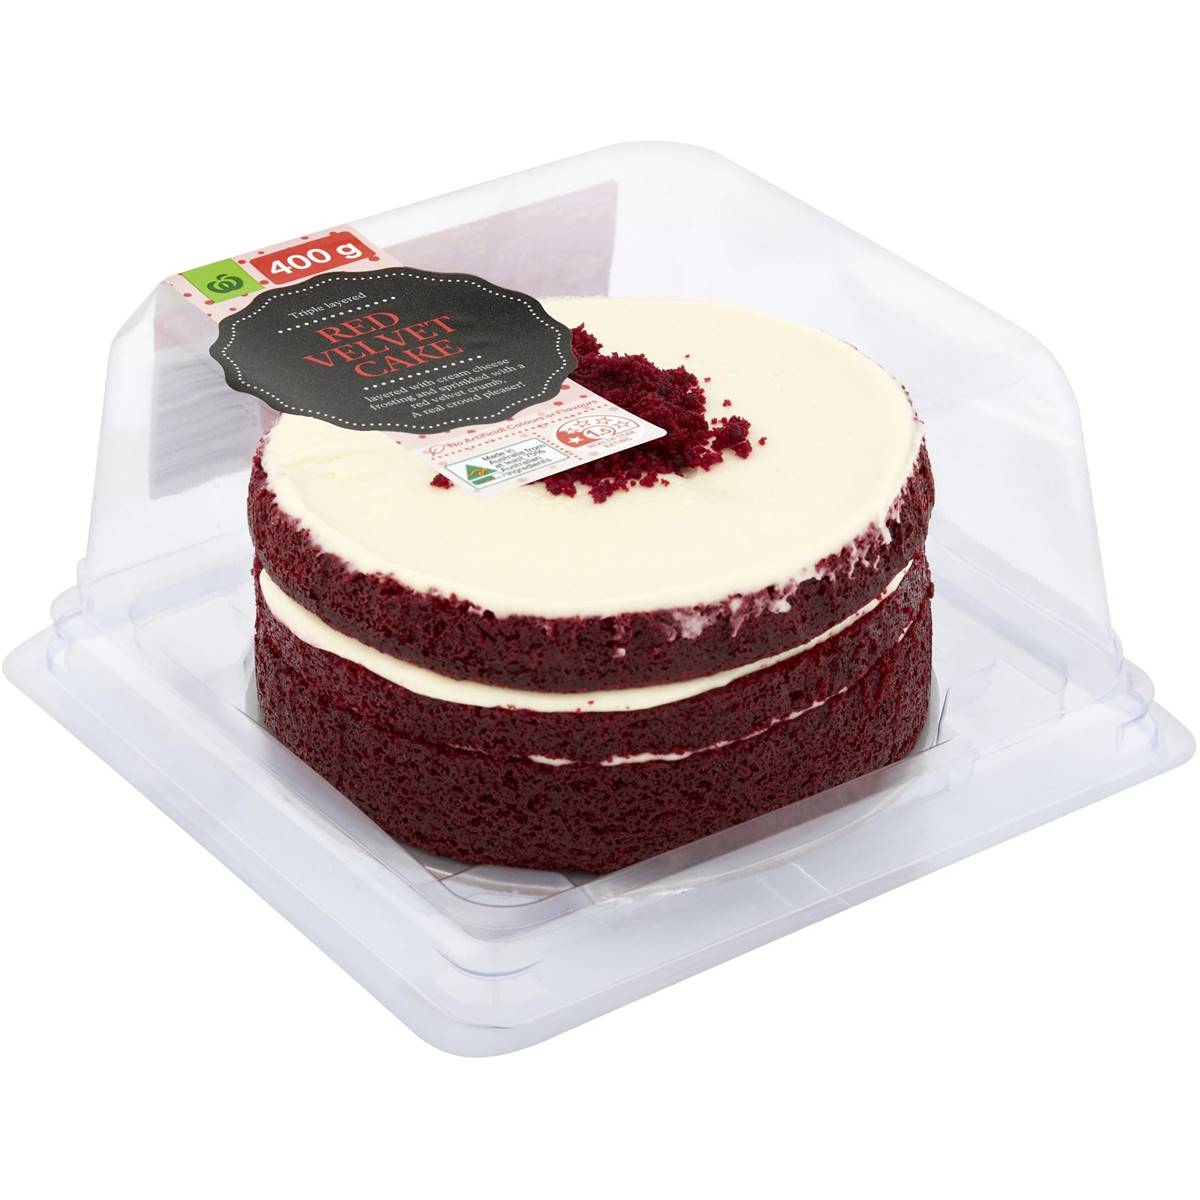 gluten free red velvet cake mix woolworths - Led To A Significant ...